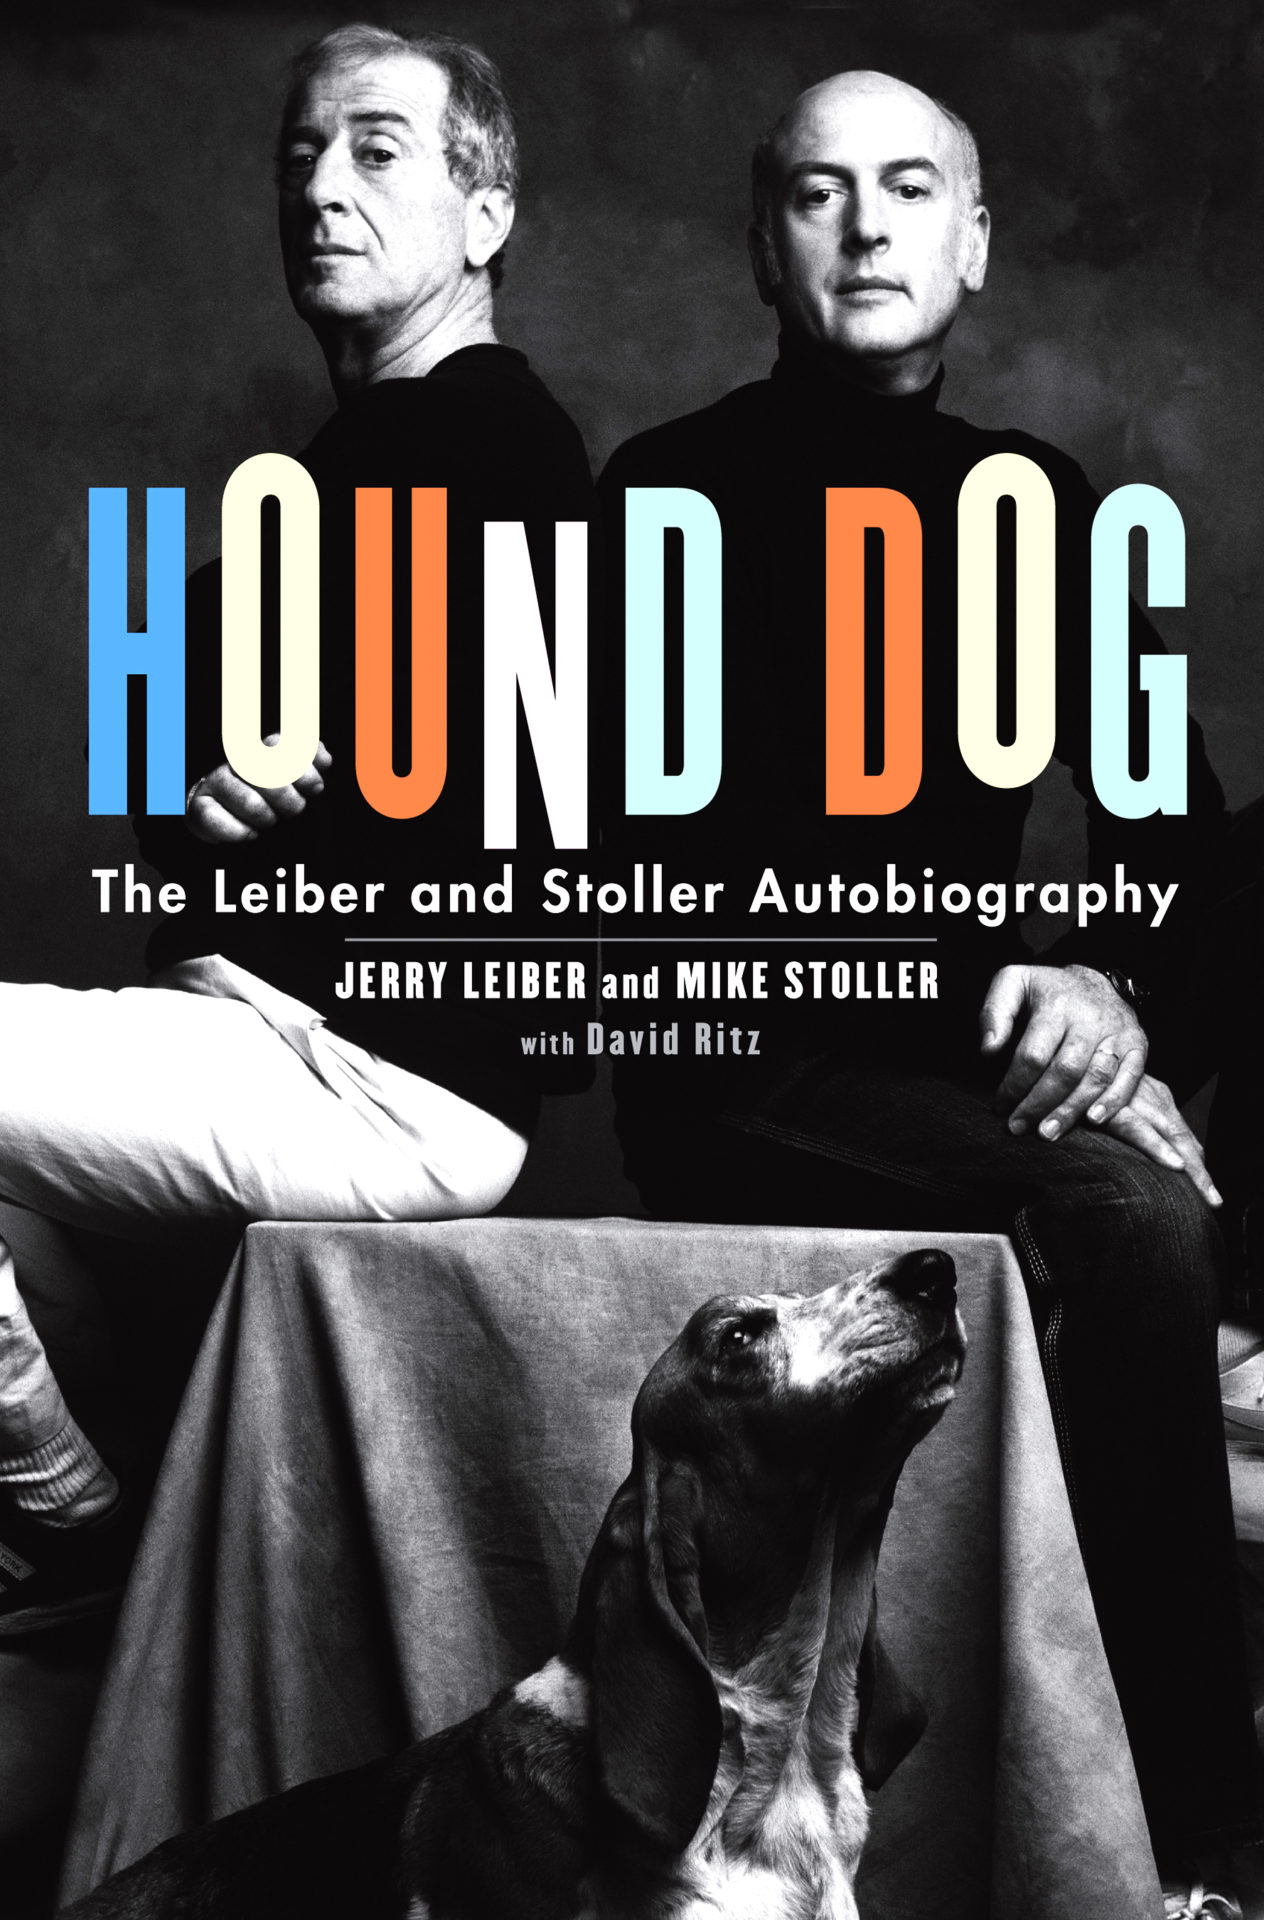 Hound Dog, Jerry Lieber and Mike Stoller